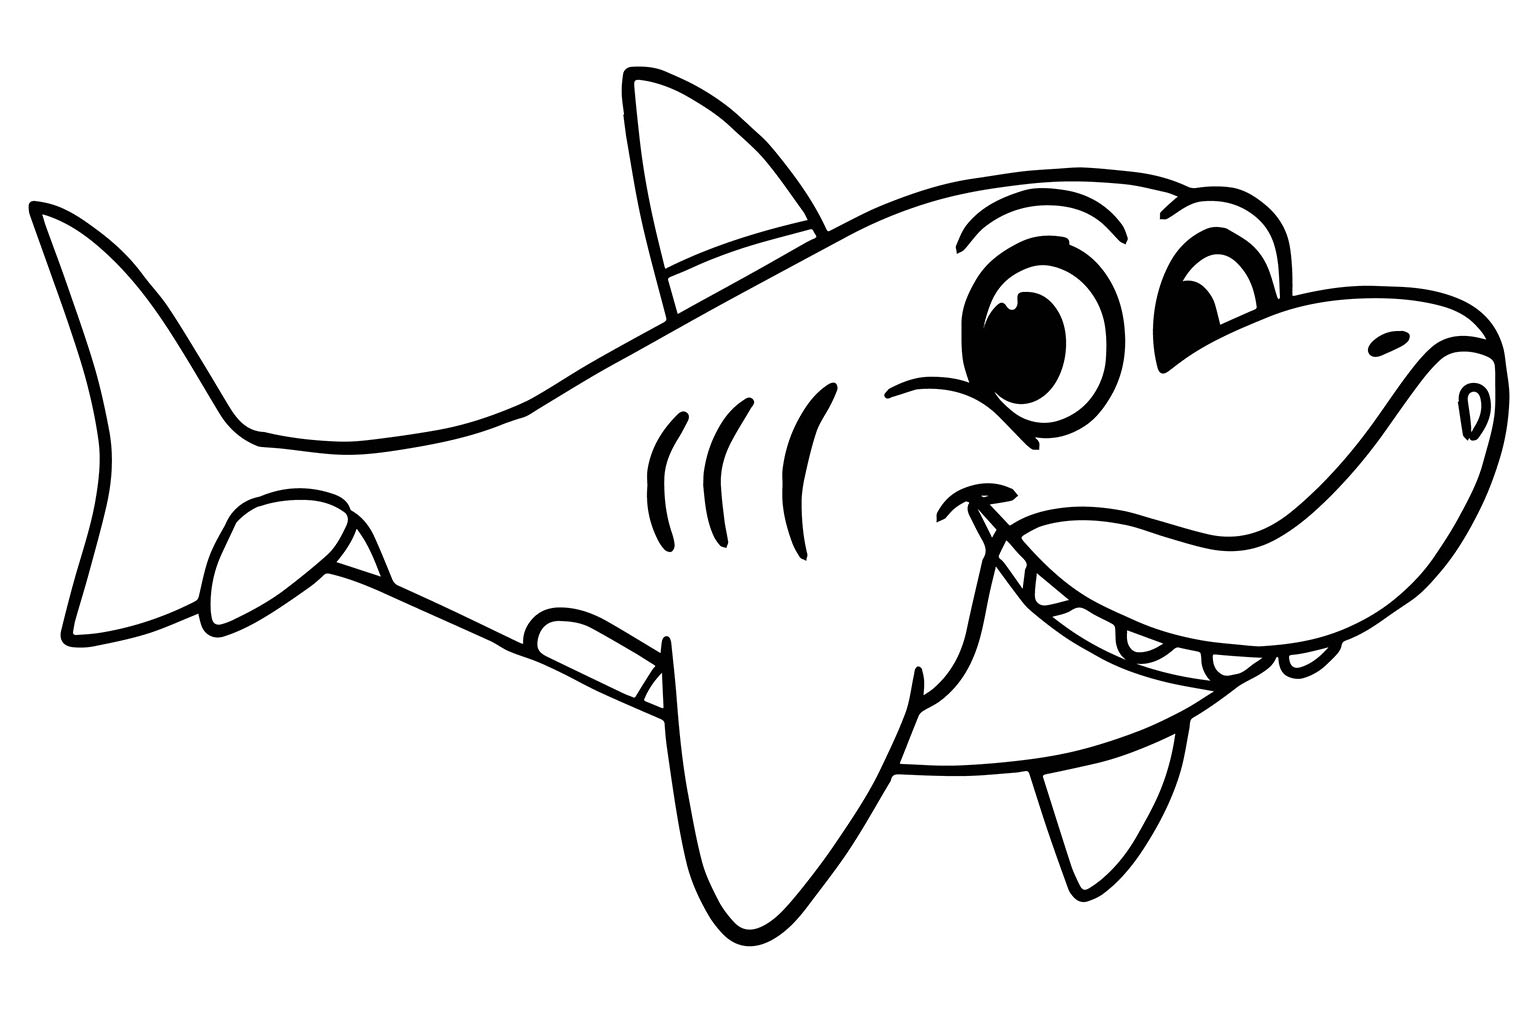 smiled-shark-coloring-page-for-preschoolers